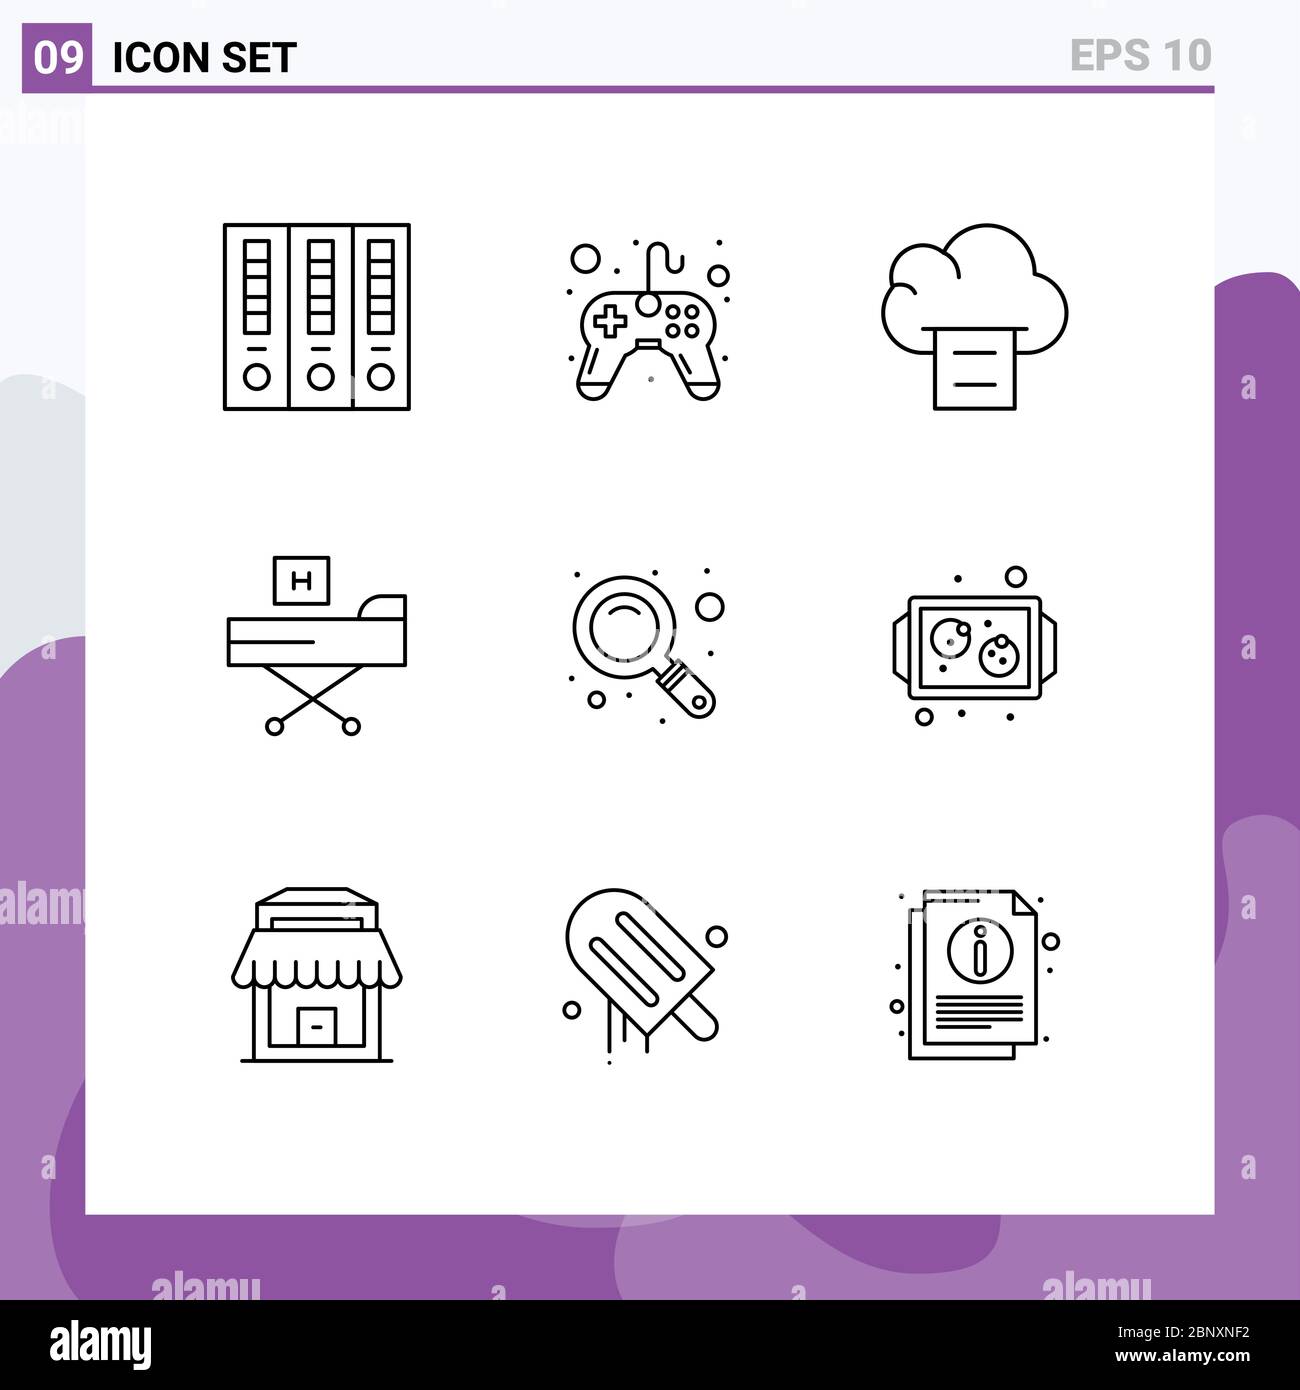 Mobile Interface Outline Set of 9 Pictograms of search, health, cloud, form, disease Editable Vector Design Elements Stock Vector